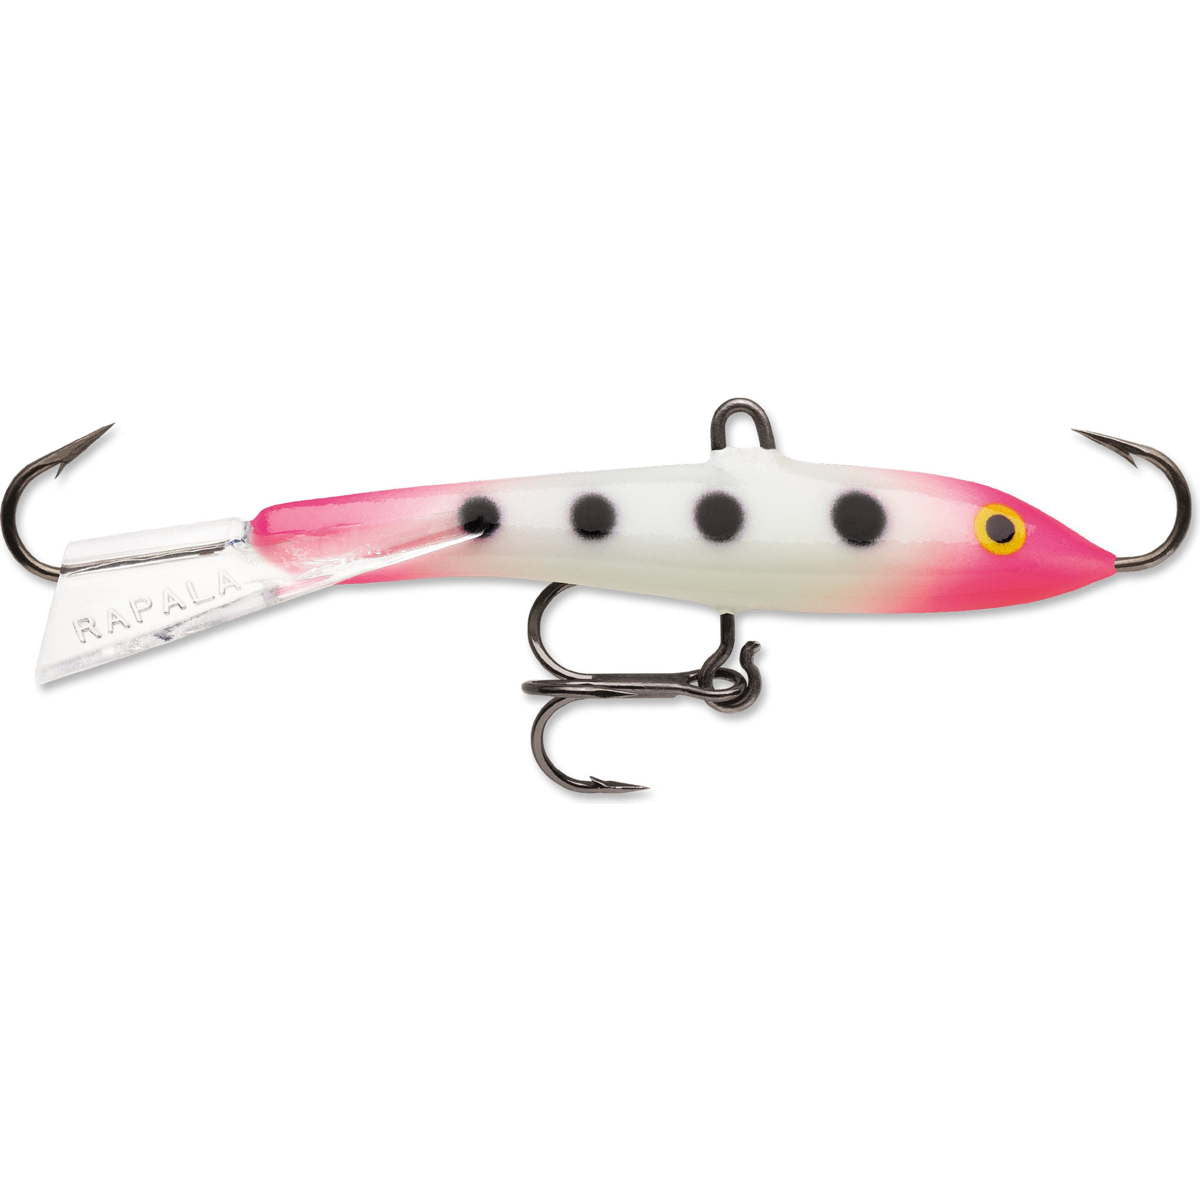 Photo of Rapala Jigging Rap for sale at United Tackle Shops.